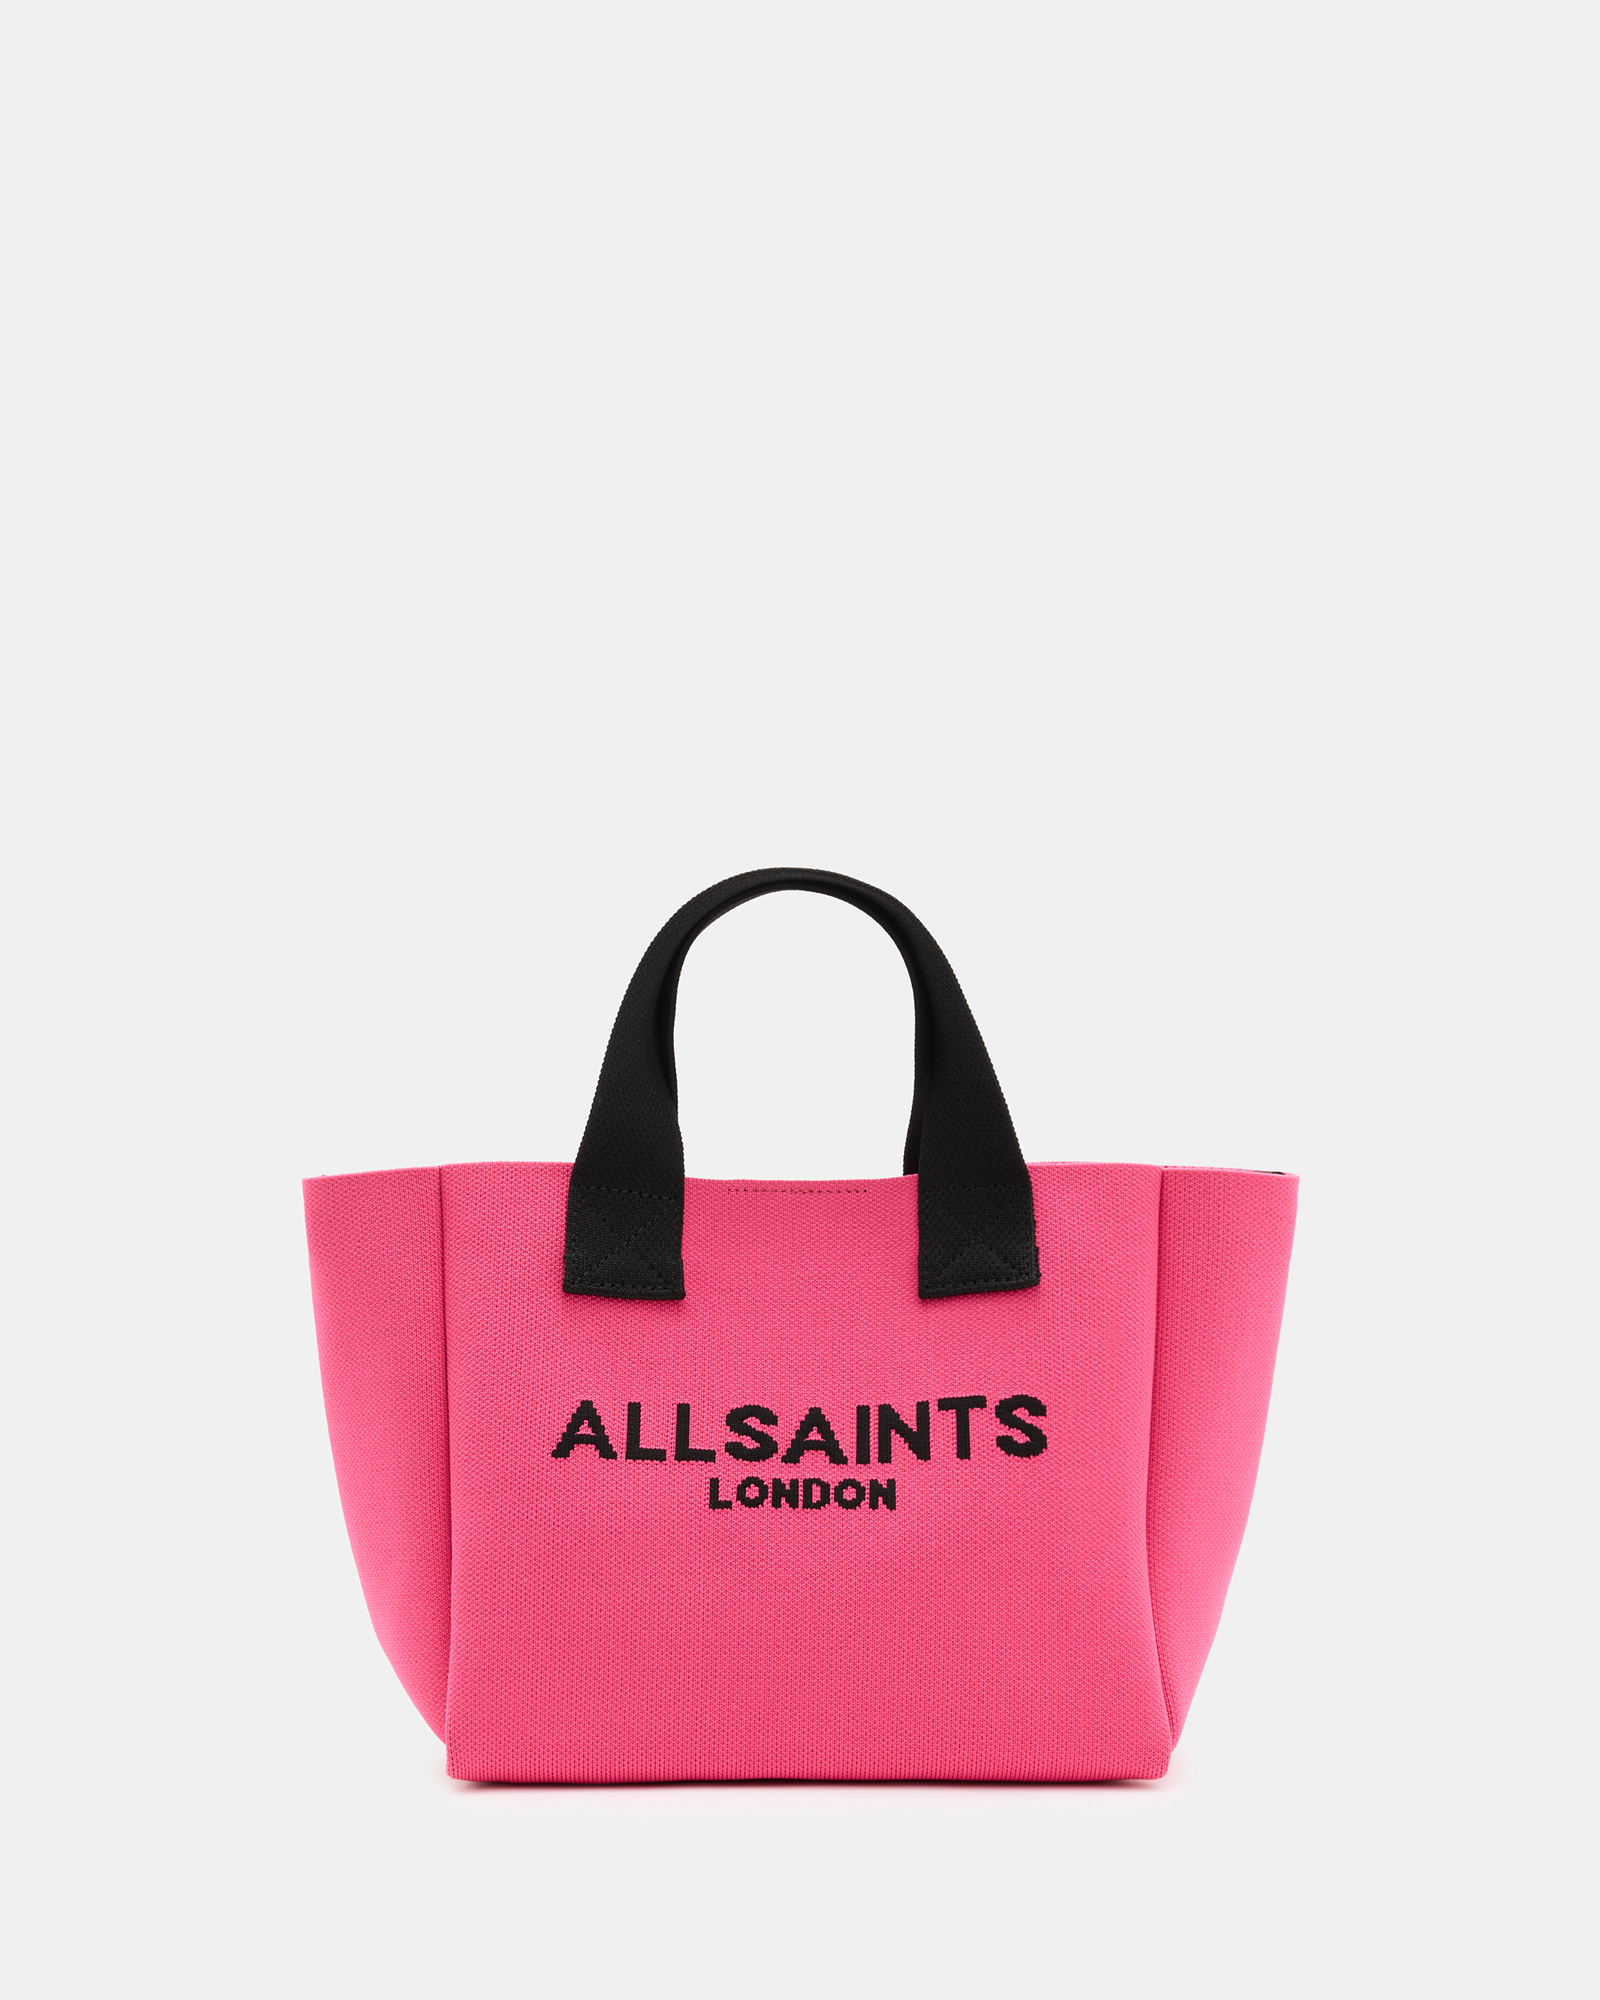 AllSaints Izzy Logo Print Knitted Mini Tote Bag,, Hot Pink